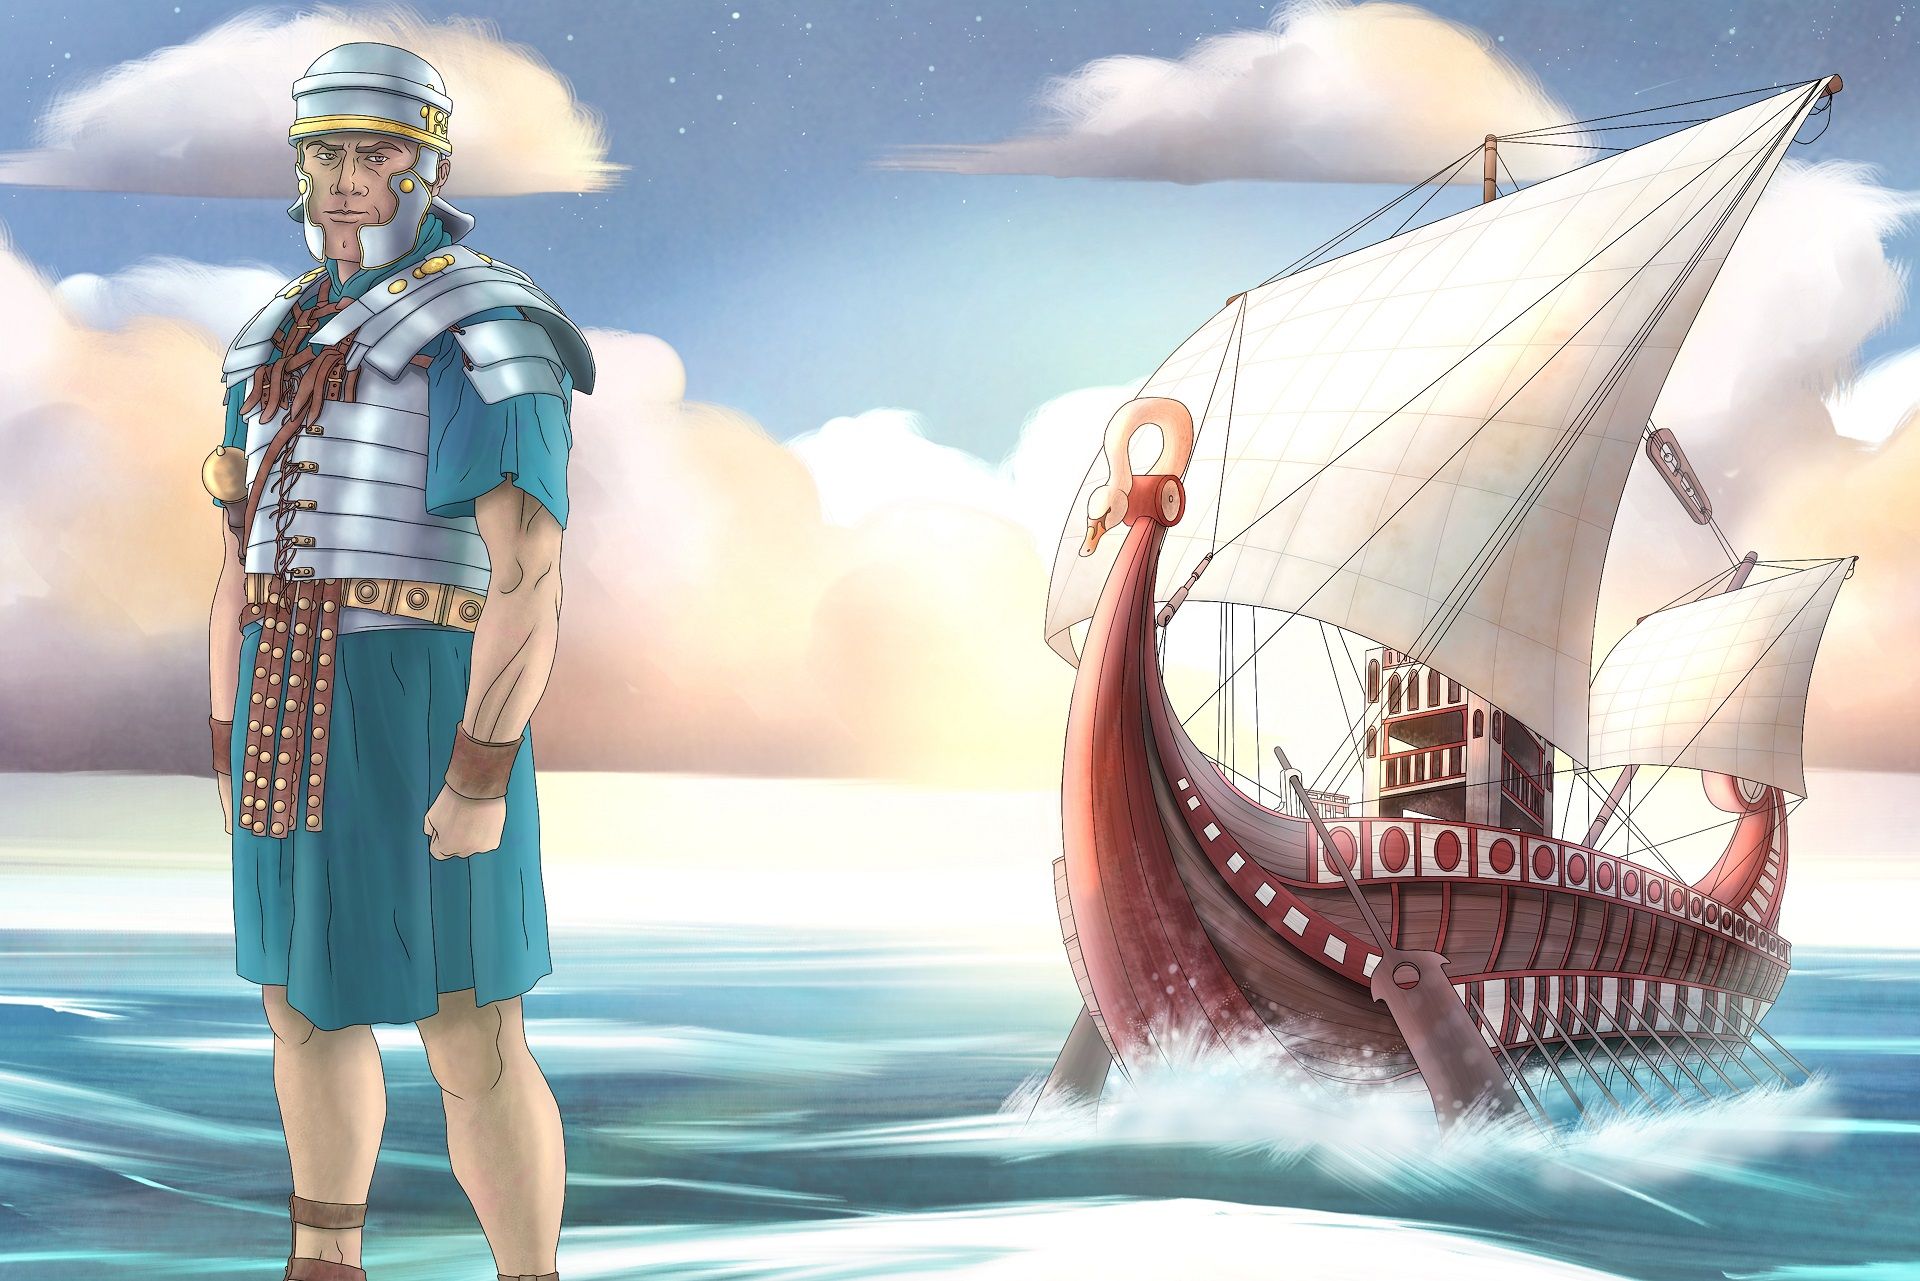 A graphic drawing on a Roman sailor, with a ship on the sea in the background.